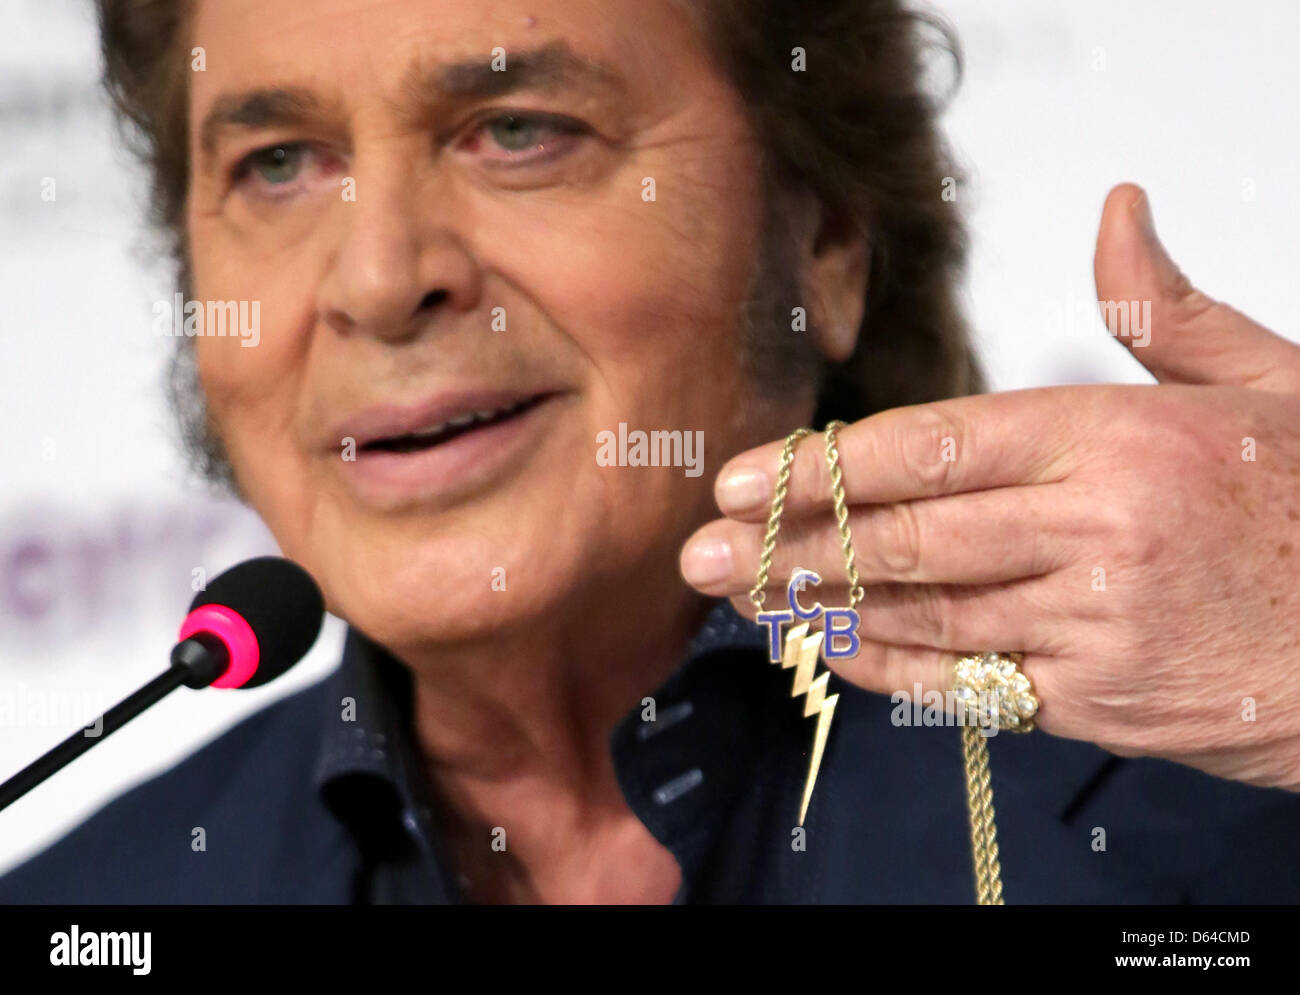 British singer Engelbert Humperdinck representing United Kingdom shows a  present from Elvis Presley during a pressconference of the Eurovision Song  Contest 2012 in Baku, Azerbaijan, 25 May 2012. The letters "T, C,